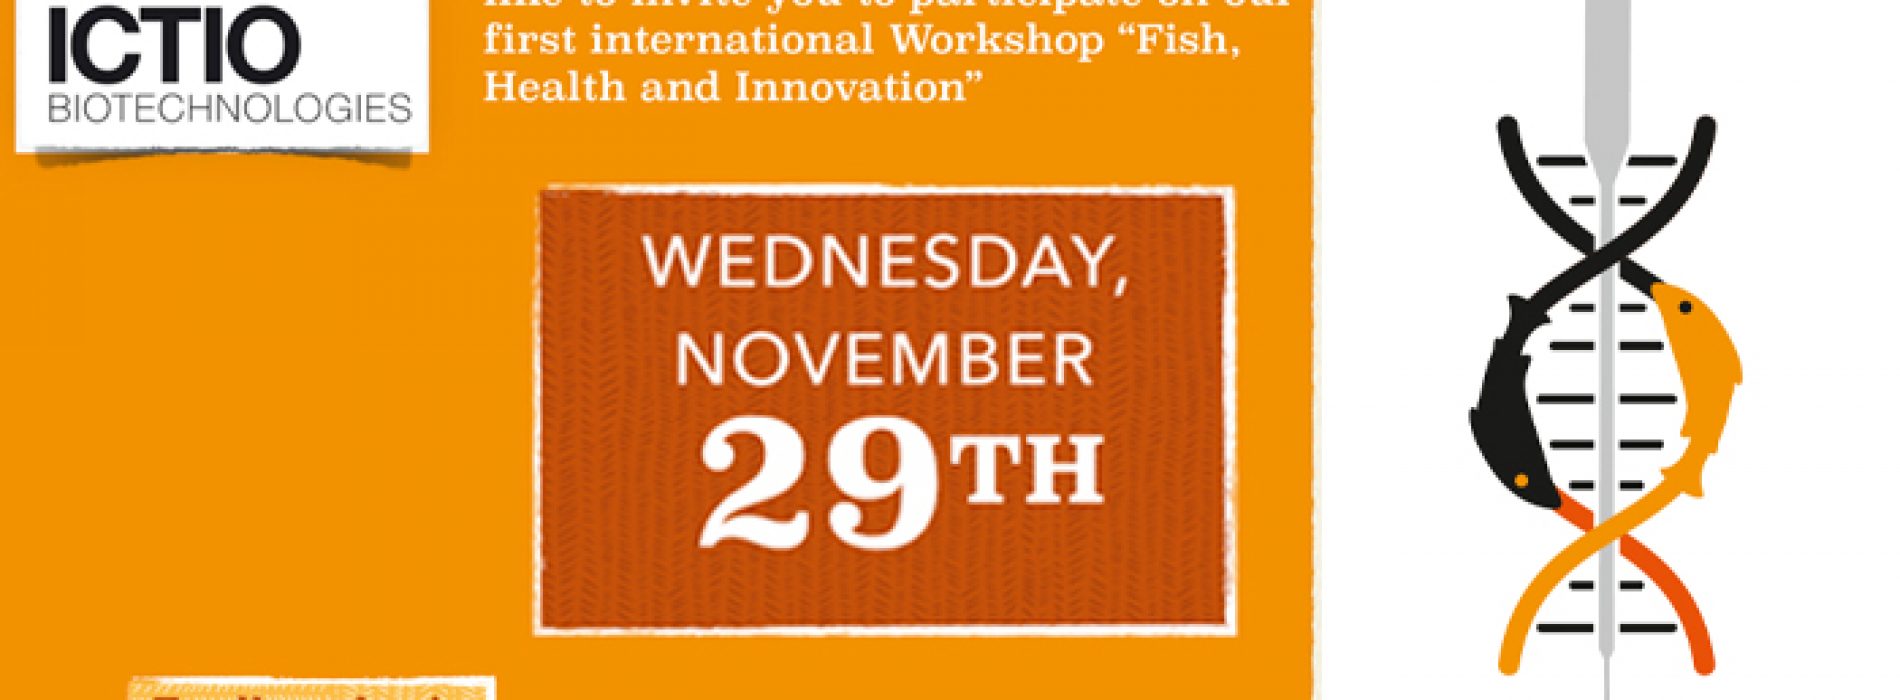 Workshop ICTIO Biotechnologies S. A., would like to invite you to participate on our first international Workshop "Fish, Health and Innovation"